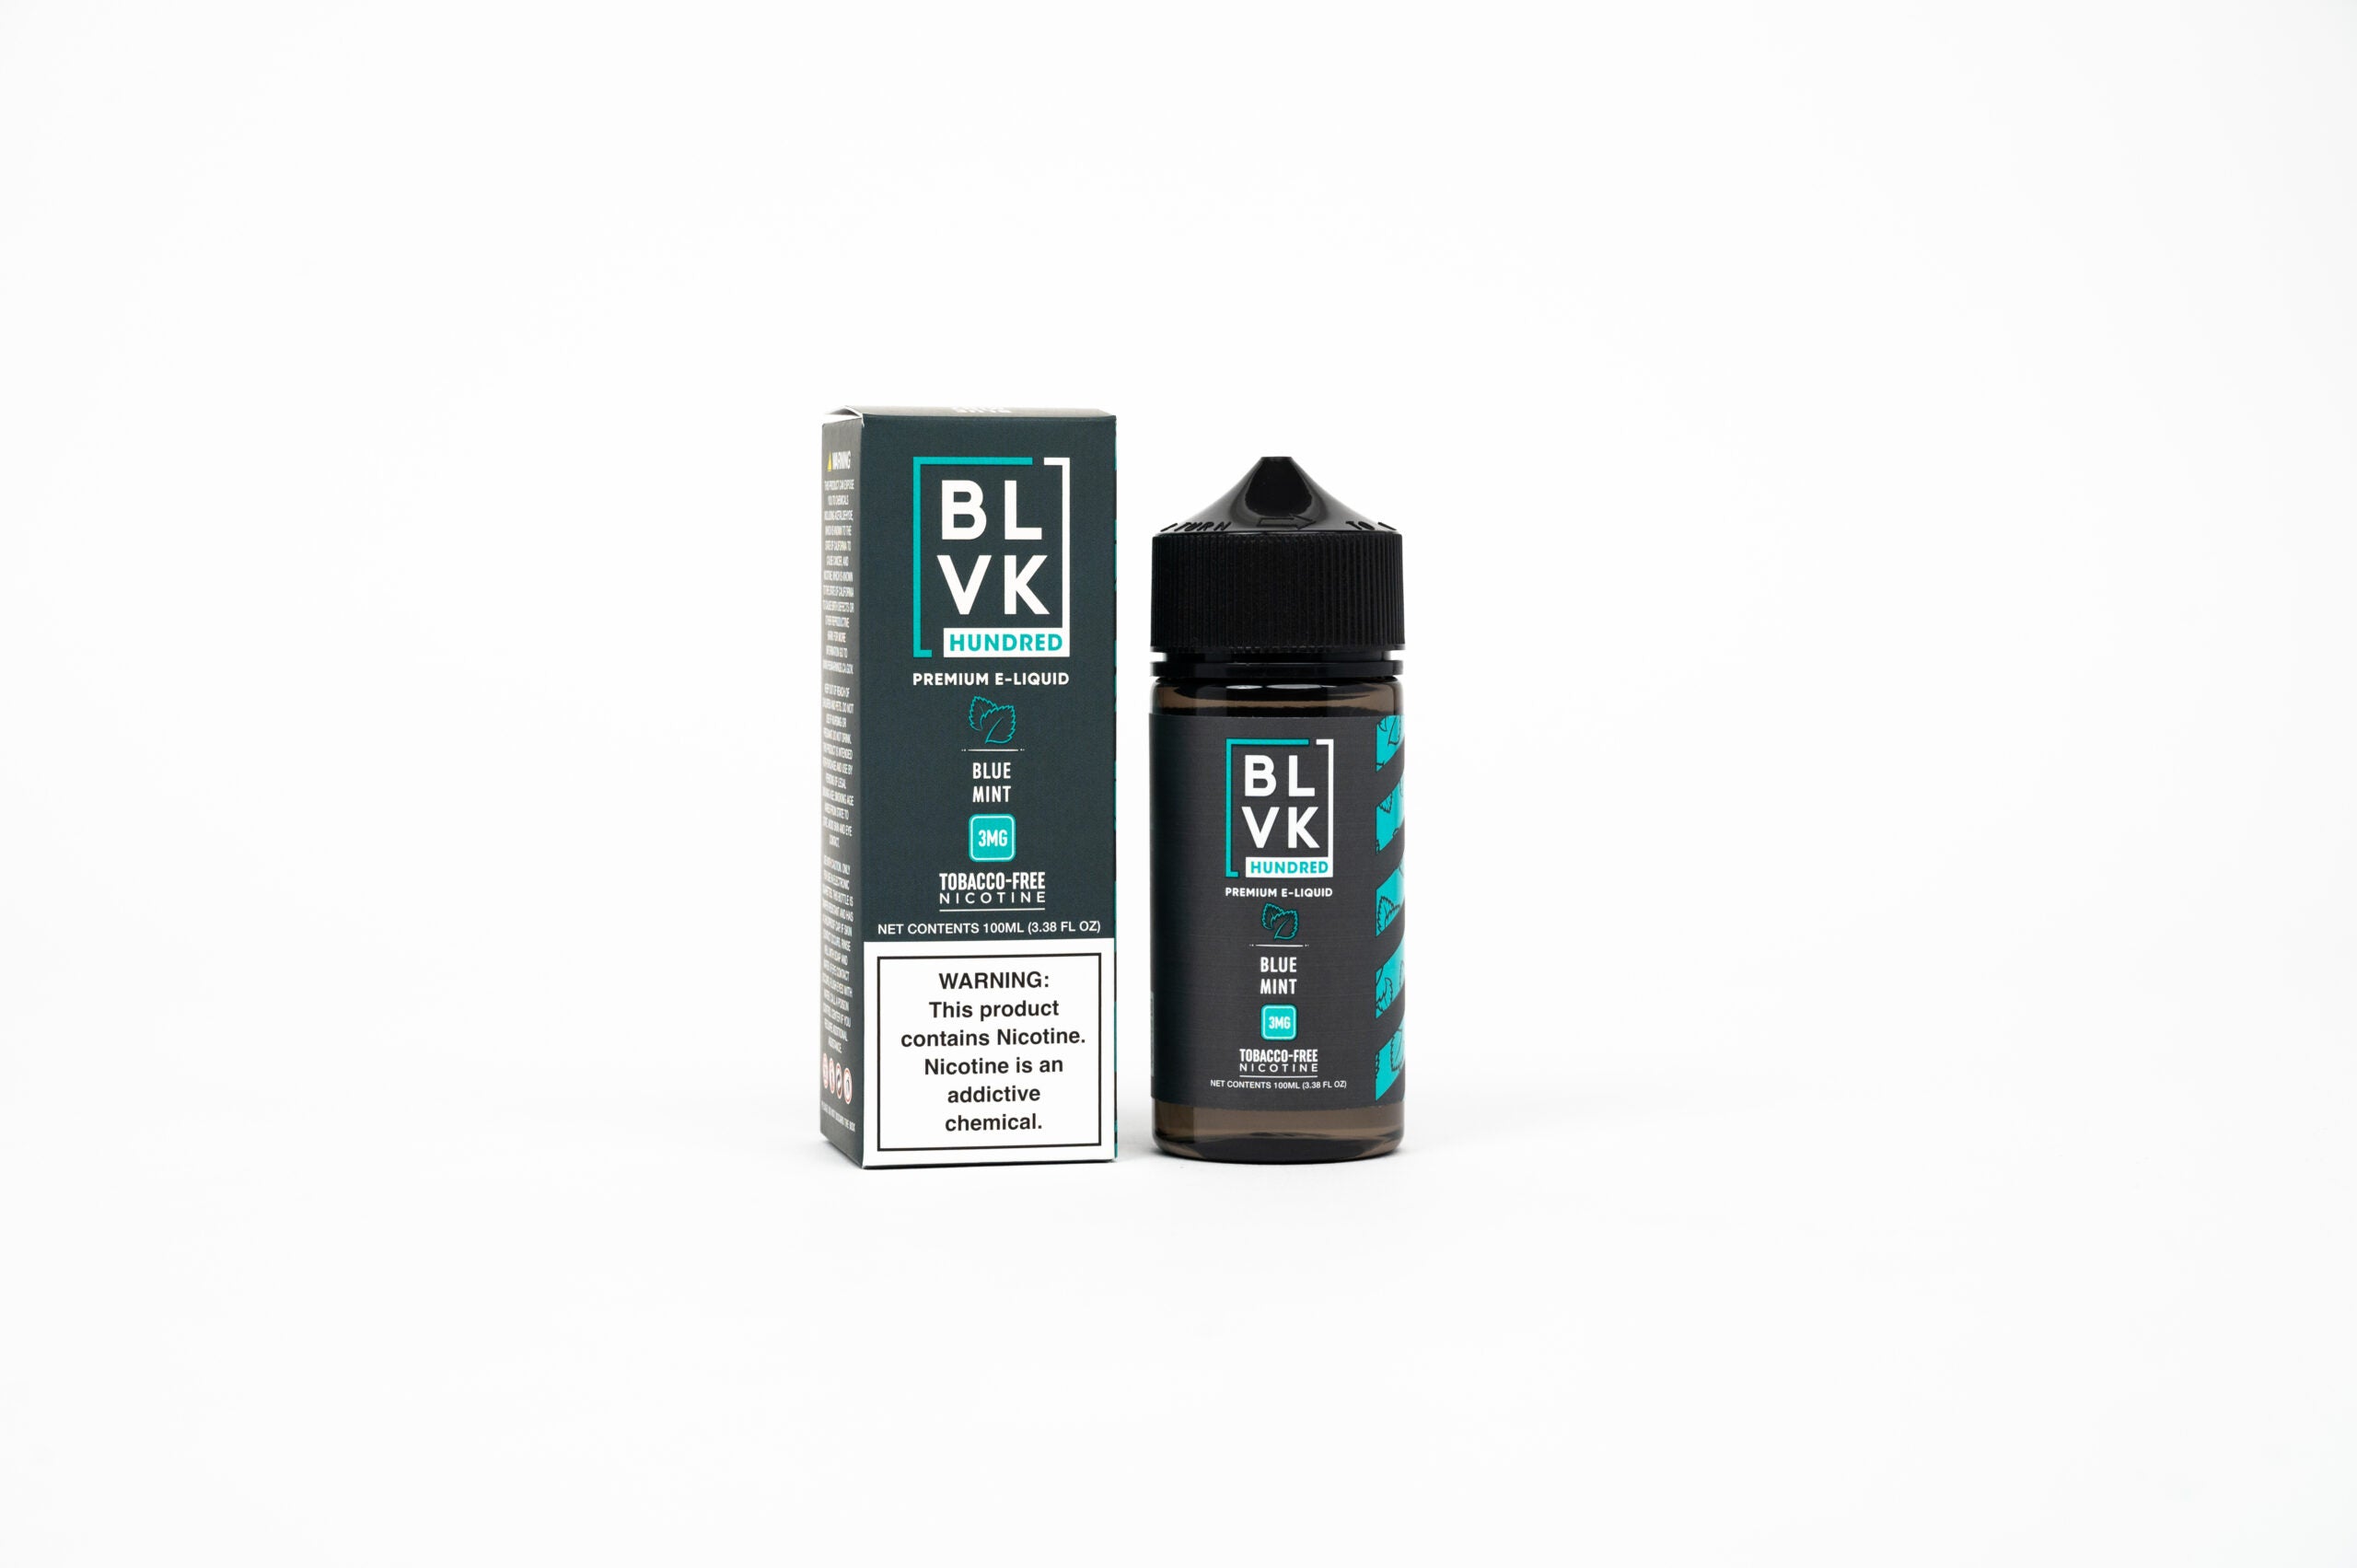 OG Mint by BLVK TF-Nic Series 100mL with Packaging